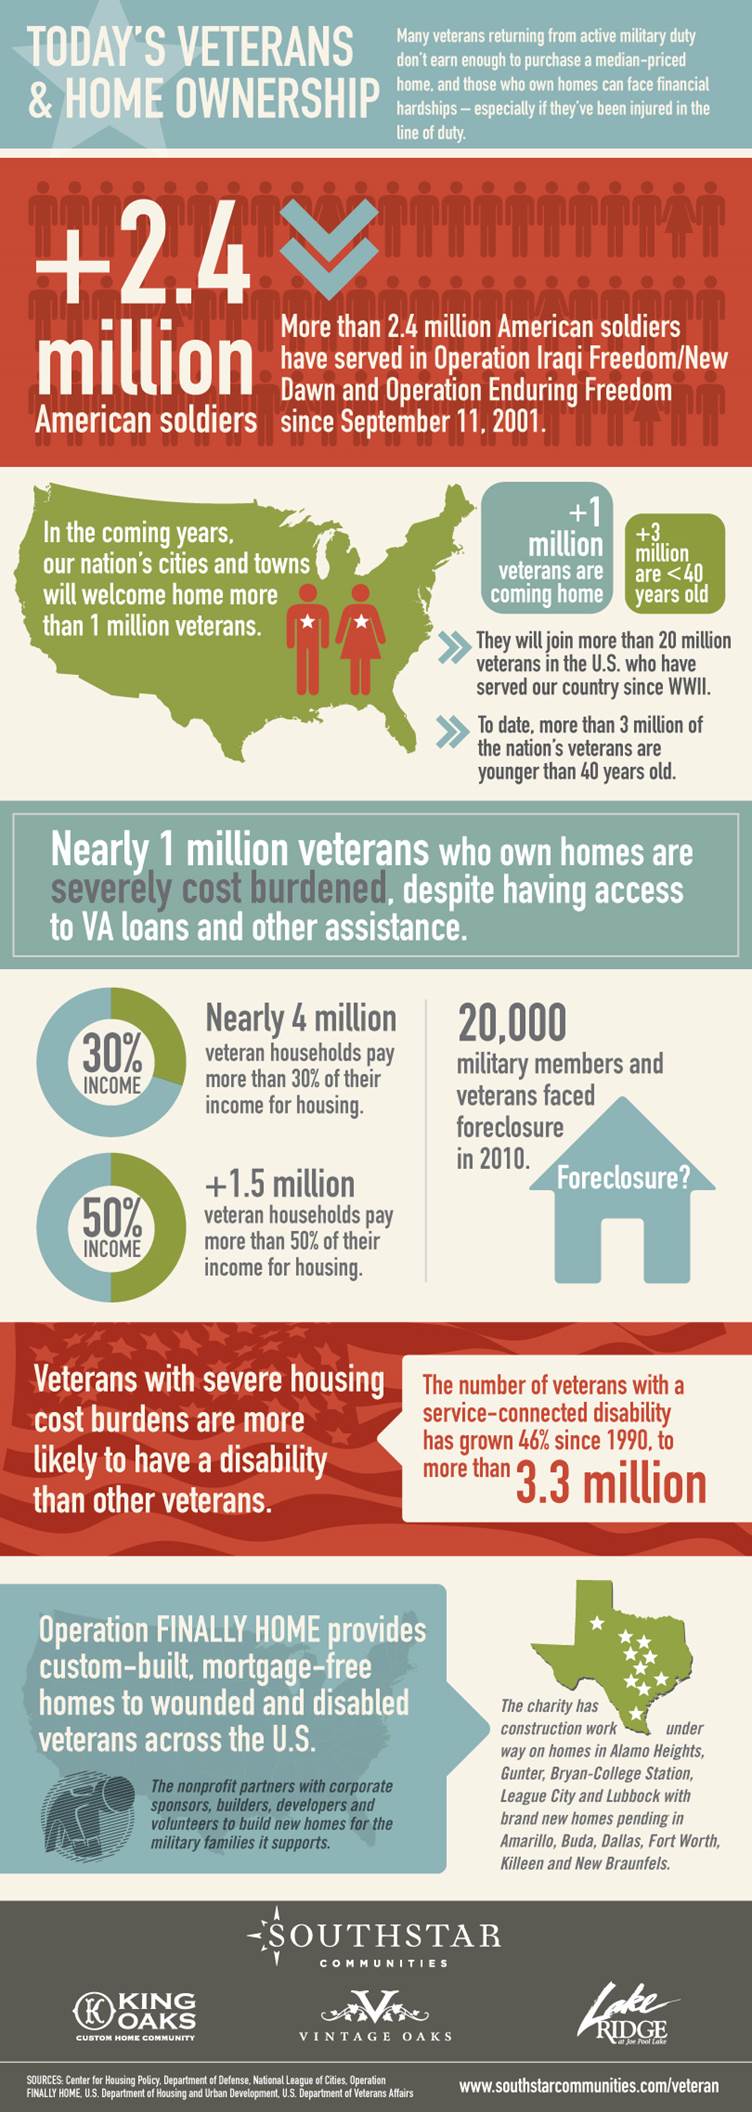 Today's Veterans and Home Ownership